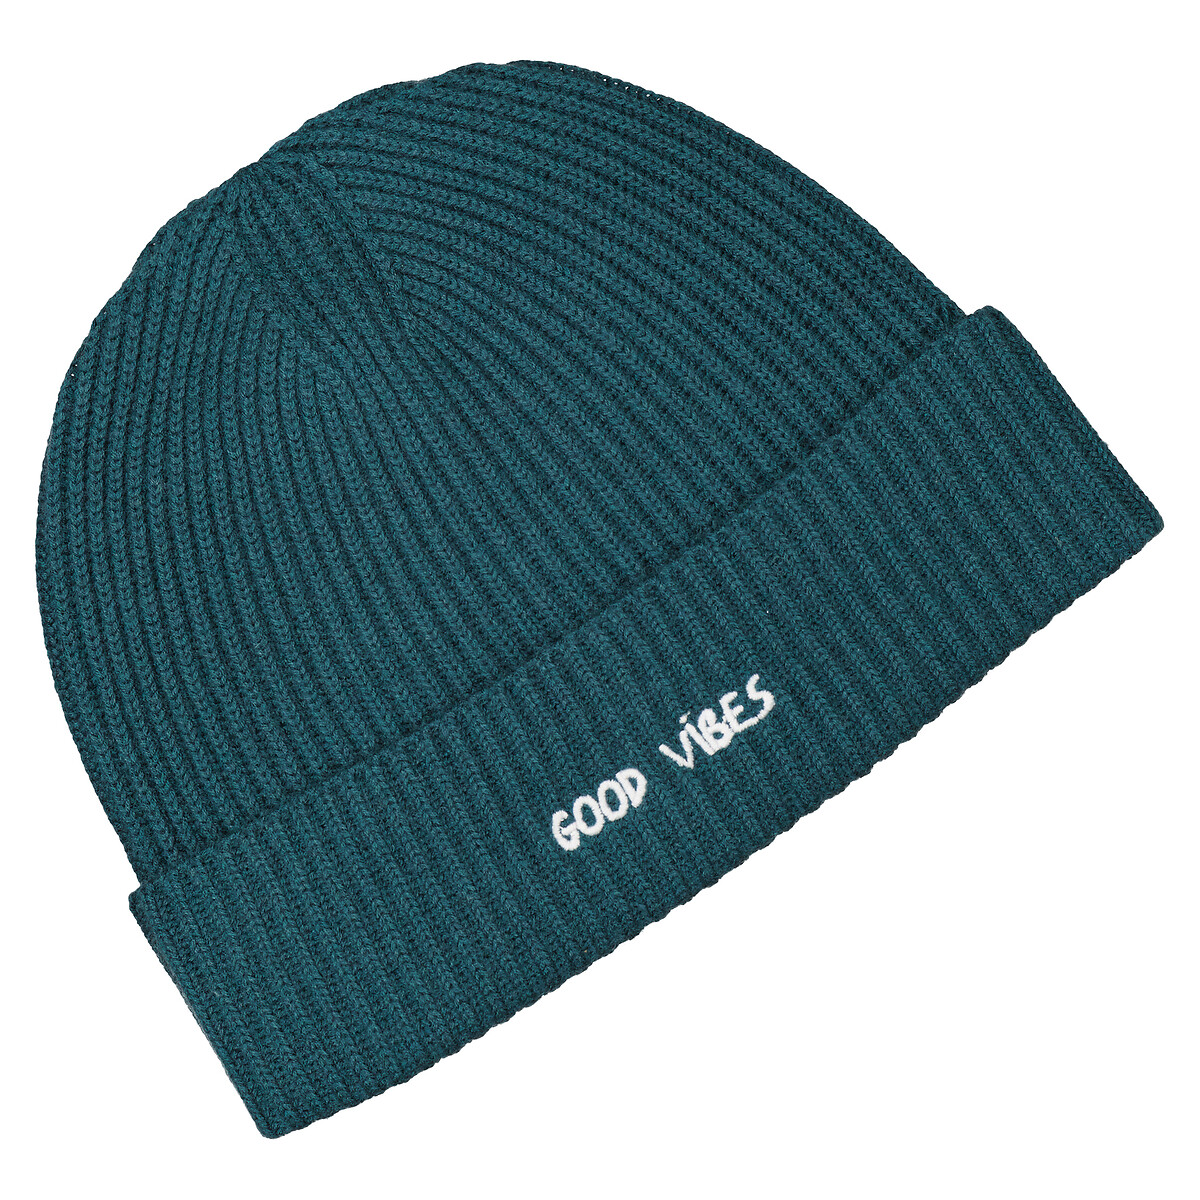 Vincennes Ribbed Wool Beanie with Turn-Up and Good Vibes Embroidery